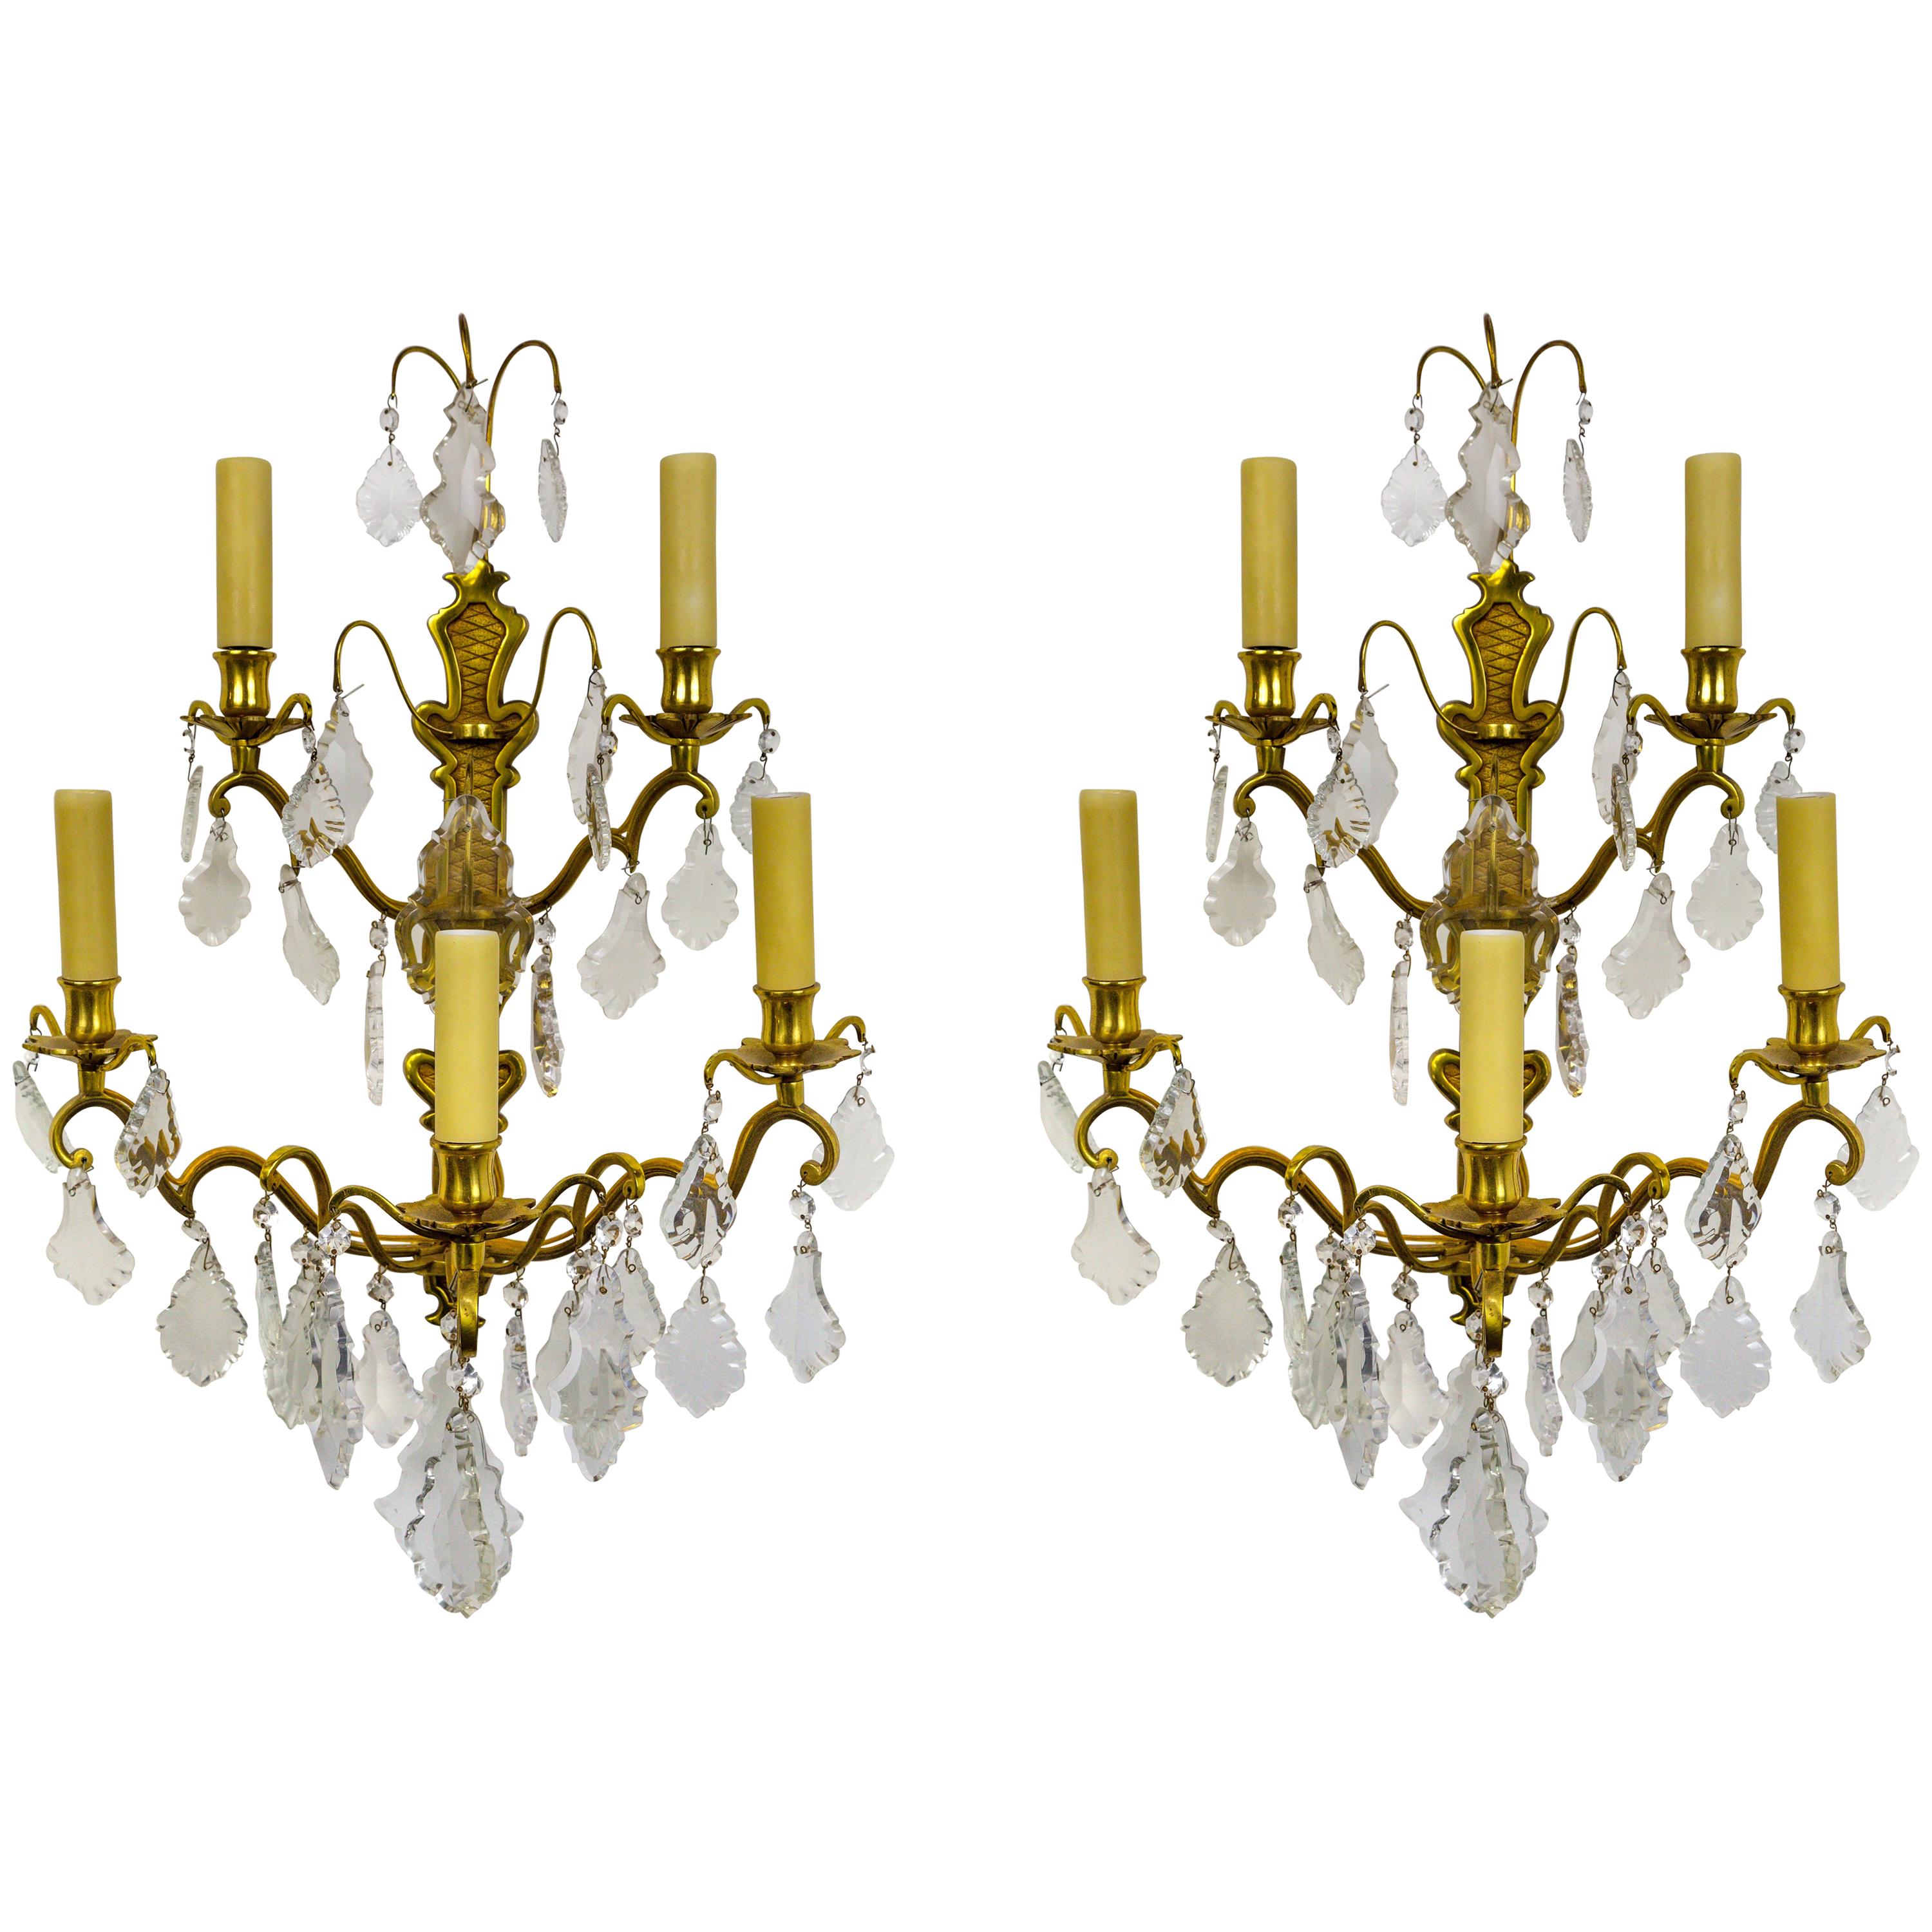 French Double Tier Crystal Candelabra Sconces, Pair